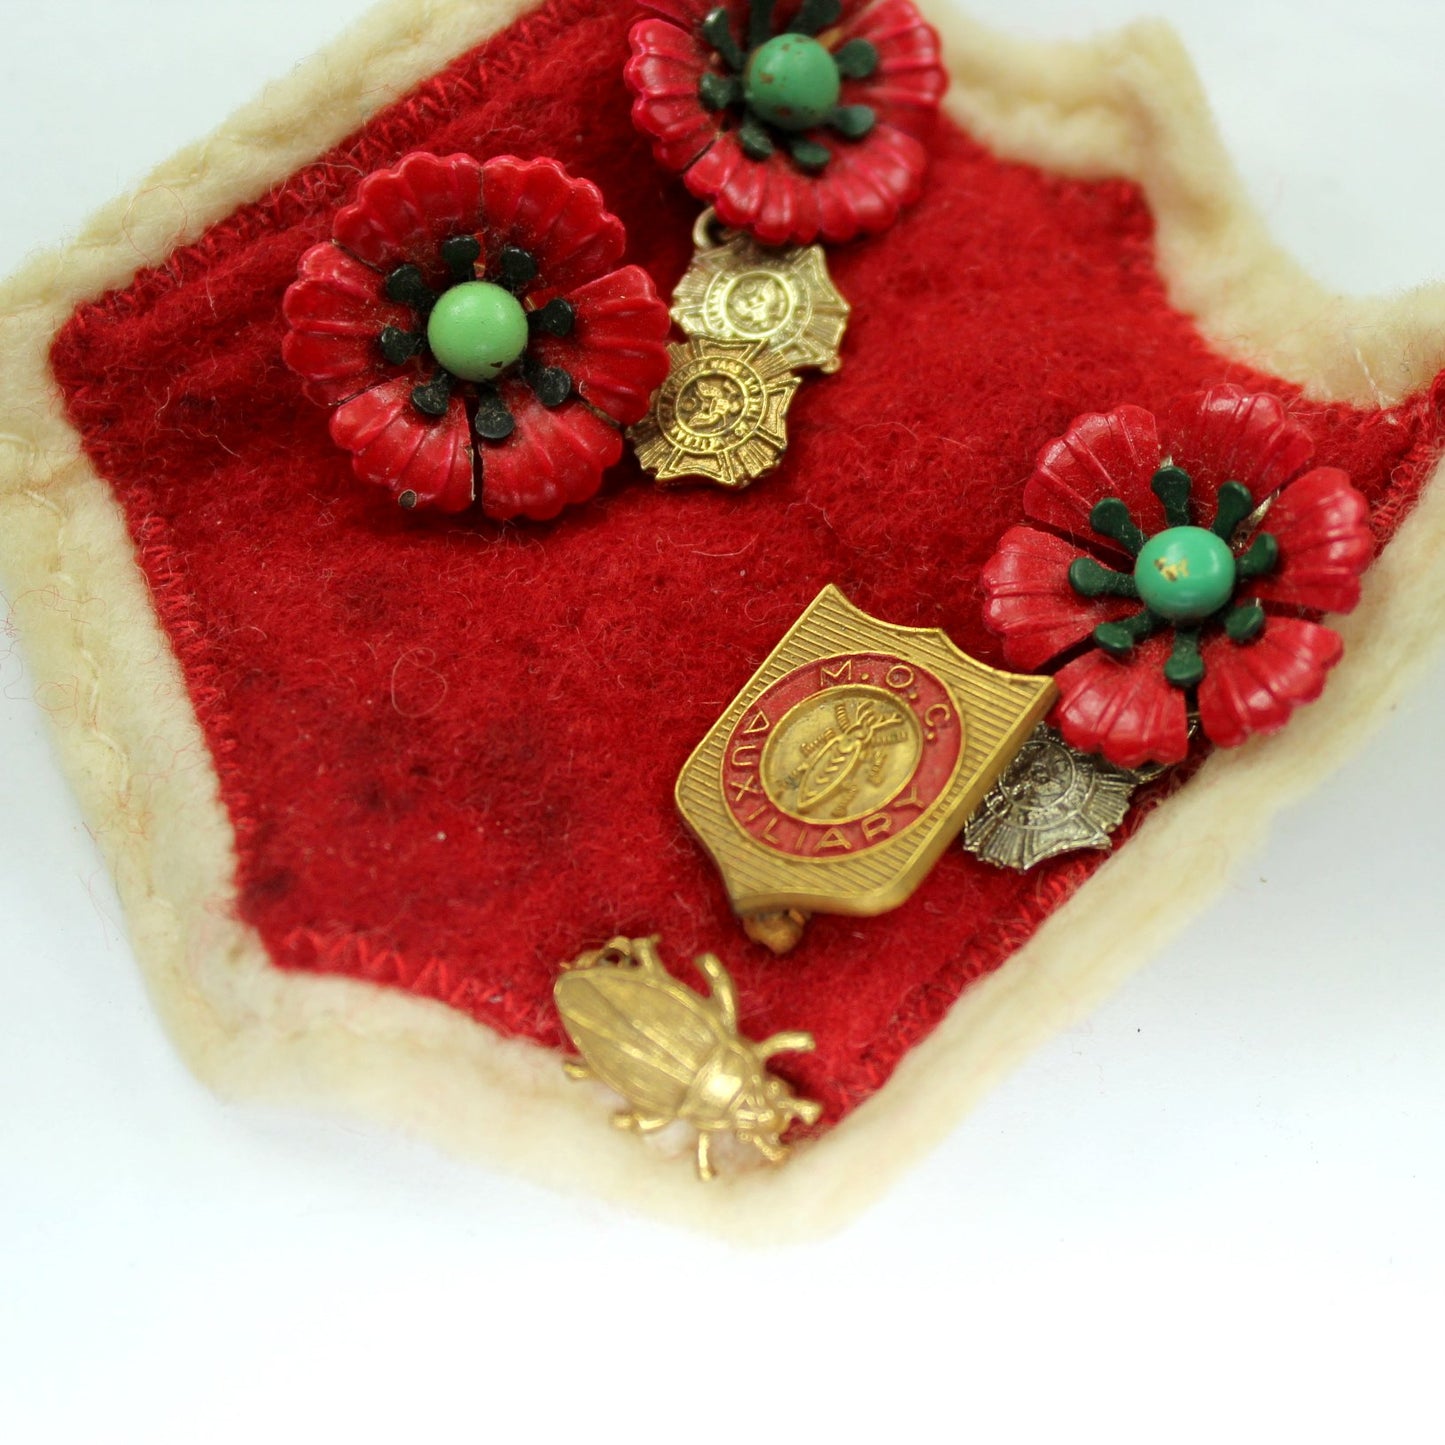 Collection Vtg Military Order Cootie Aux and VFW Poppies Medals Red Felt Patch Cootie Pin close view